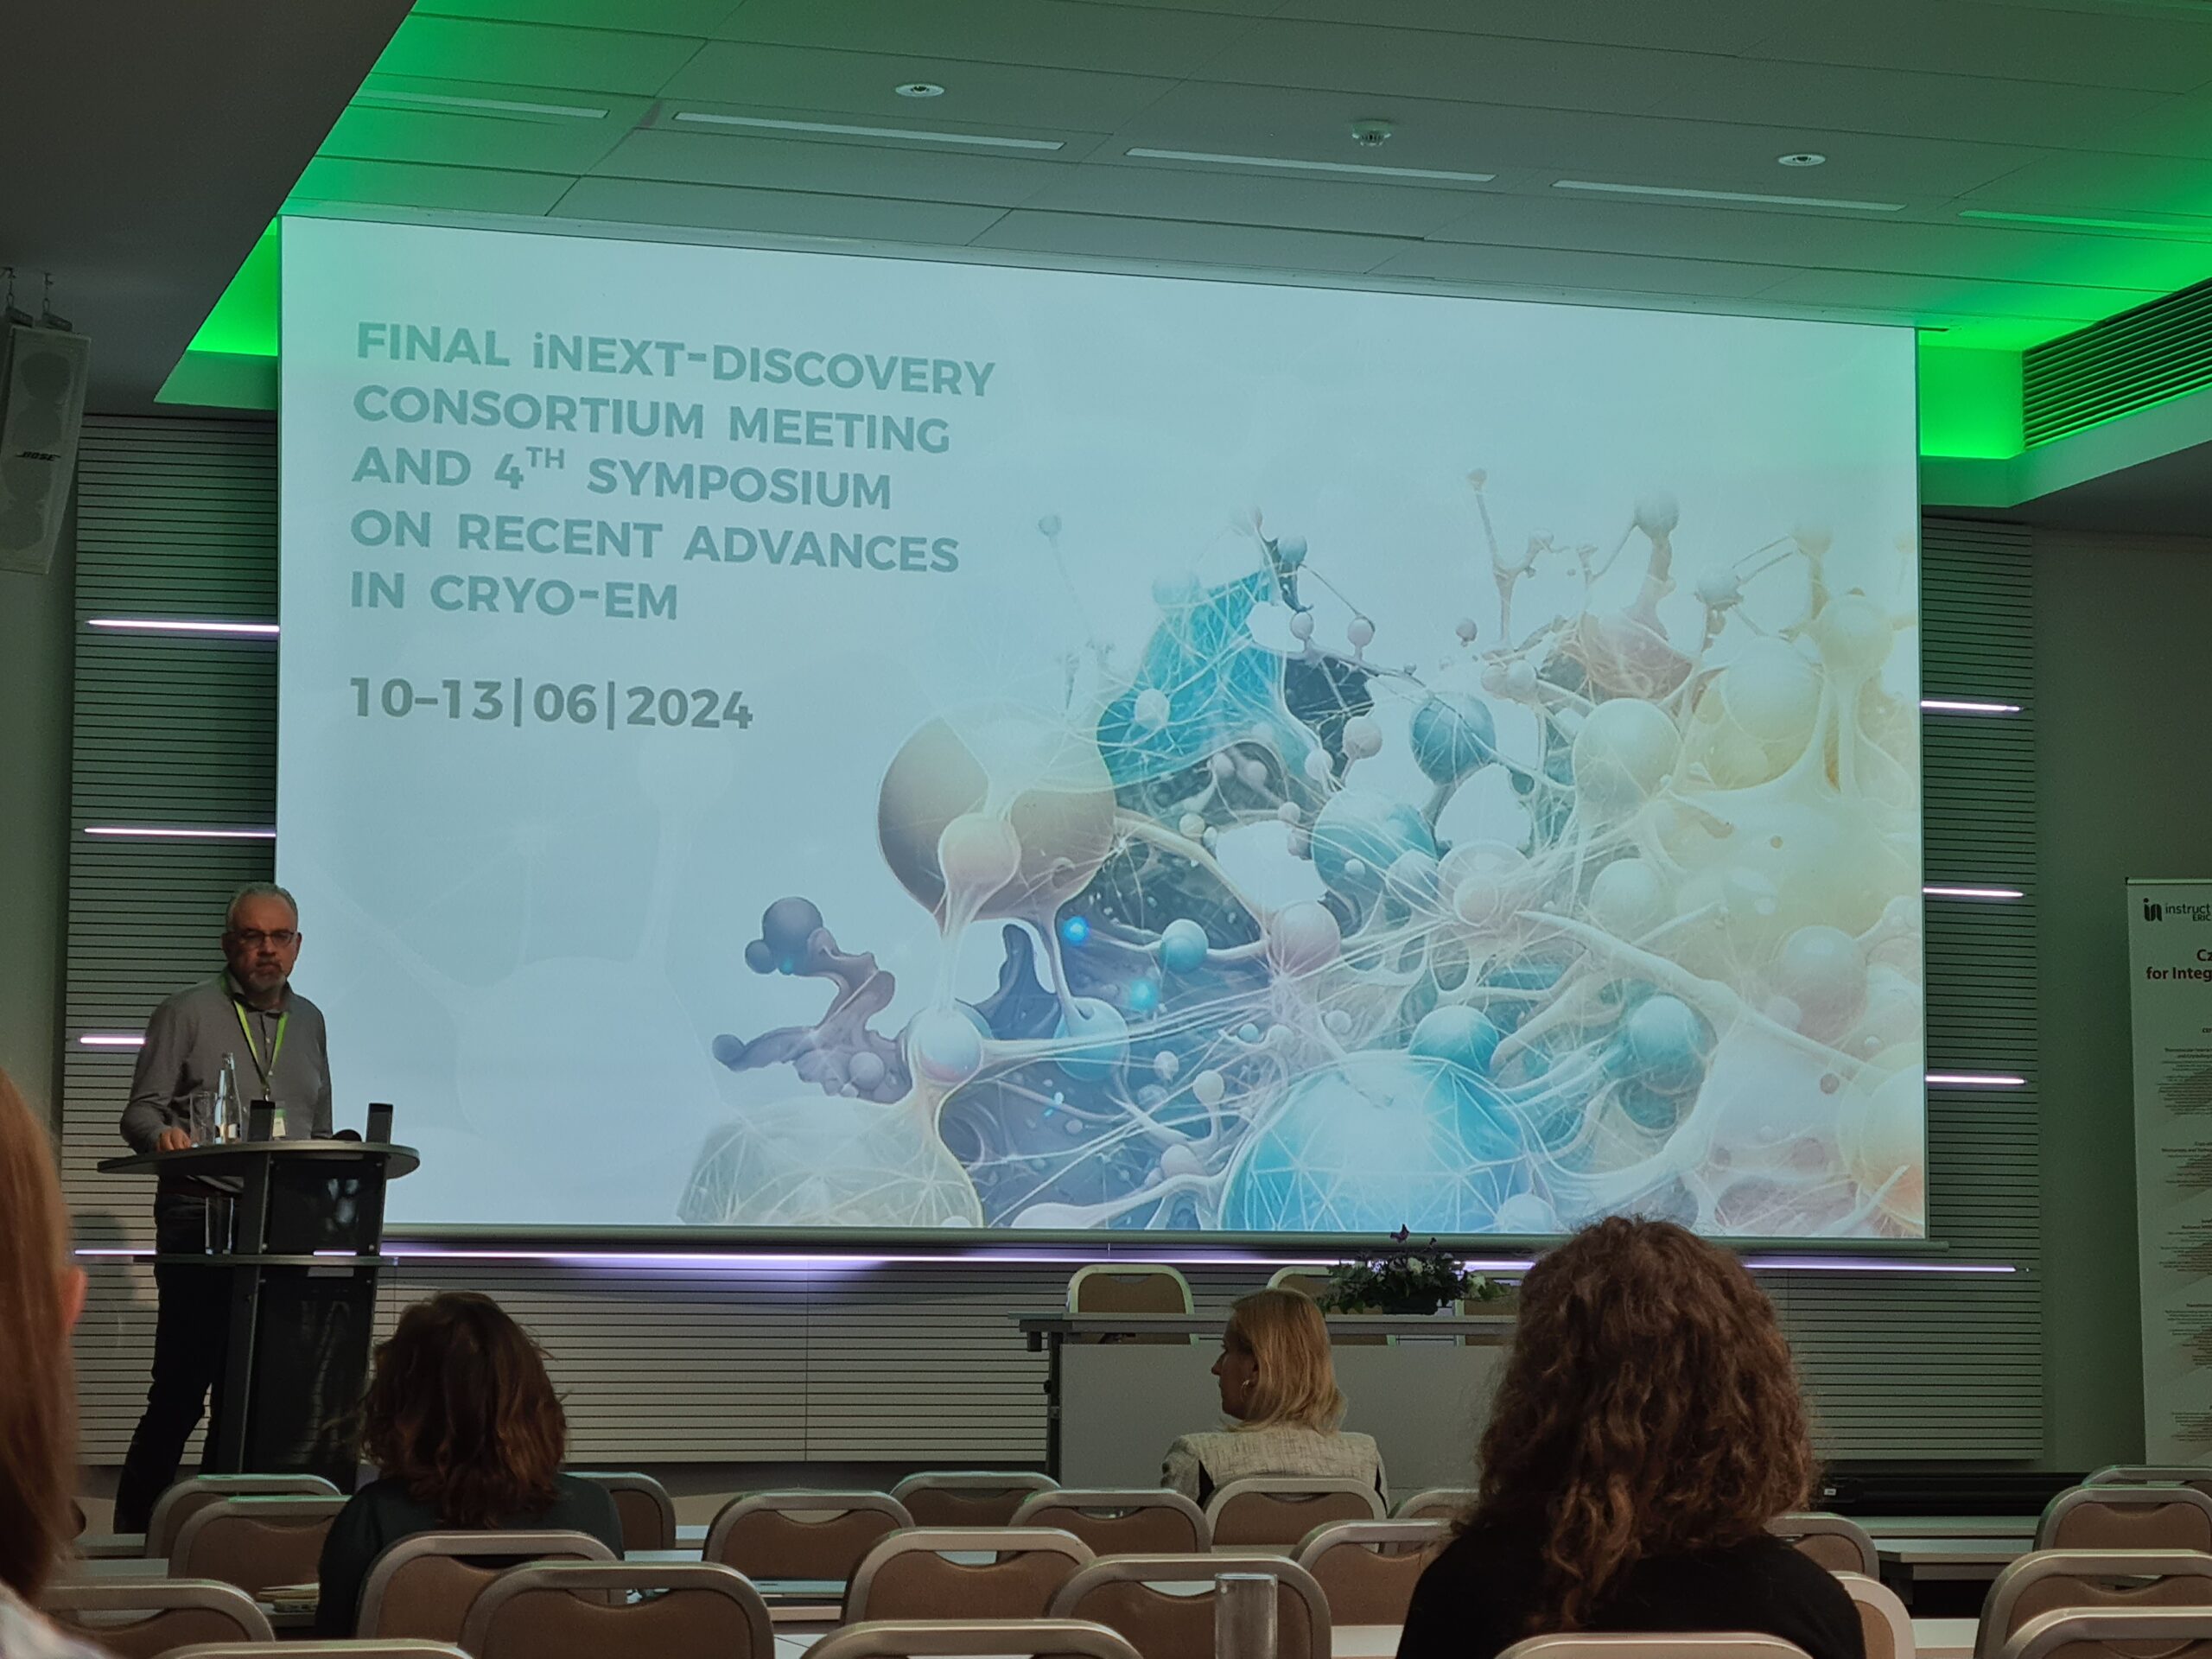 Opening of the iNext-Discovery final meeting by the project coordinator